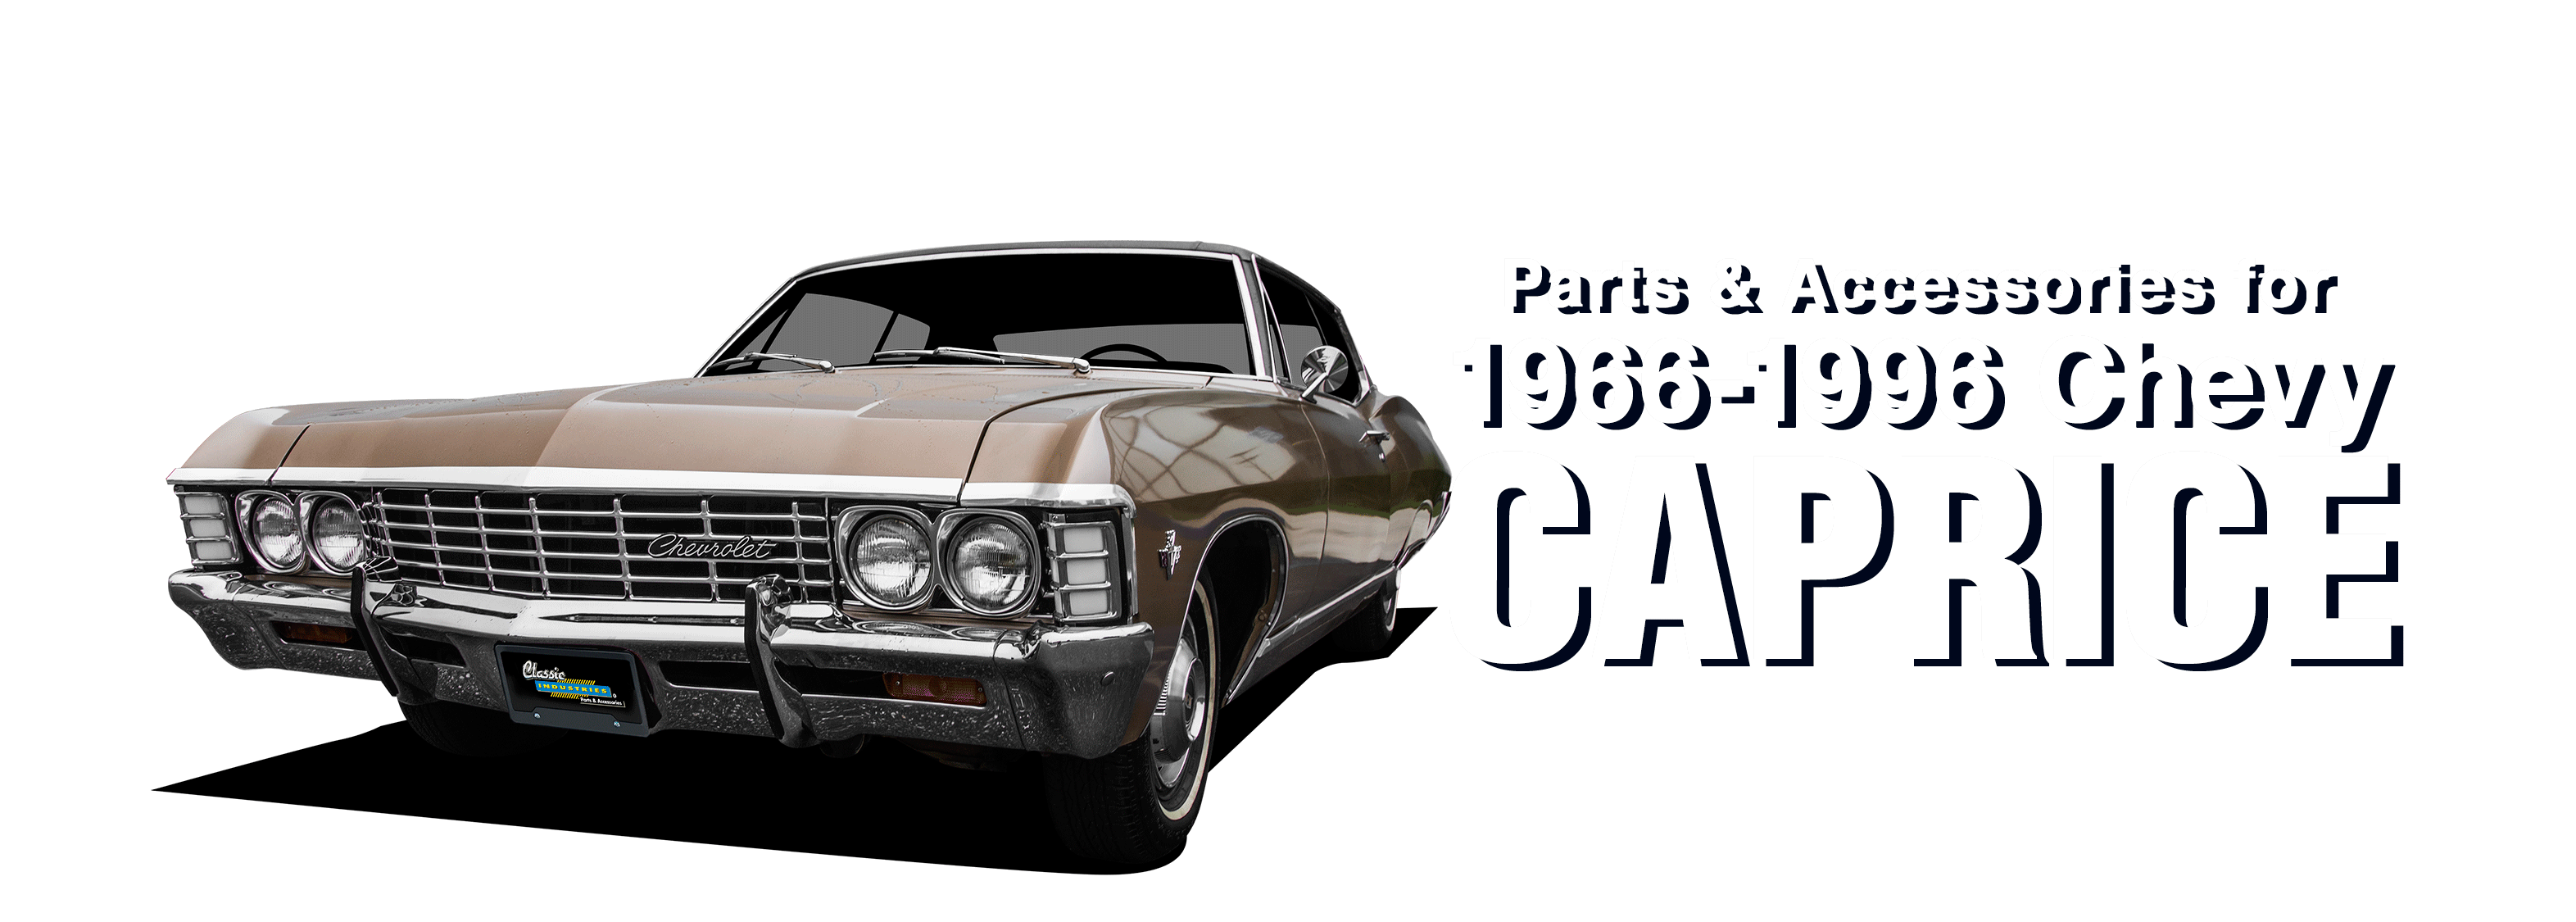 Parts & Accessories for 1966-1996 Chevrolet Caprice